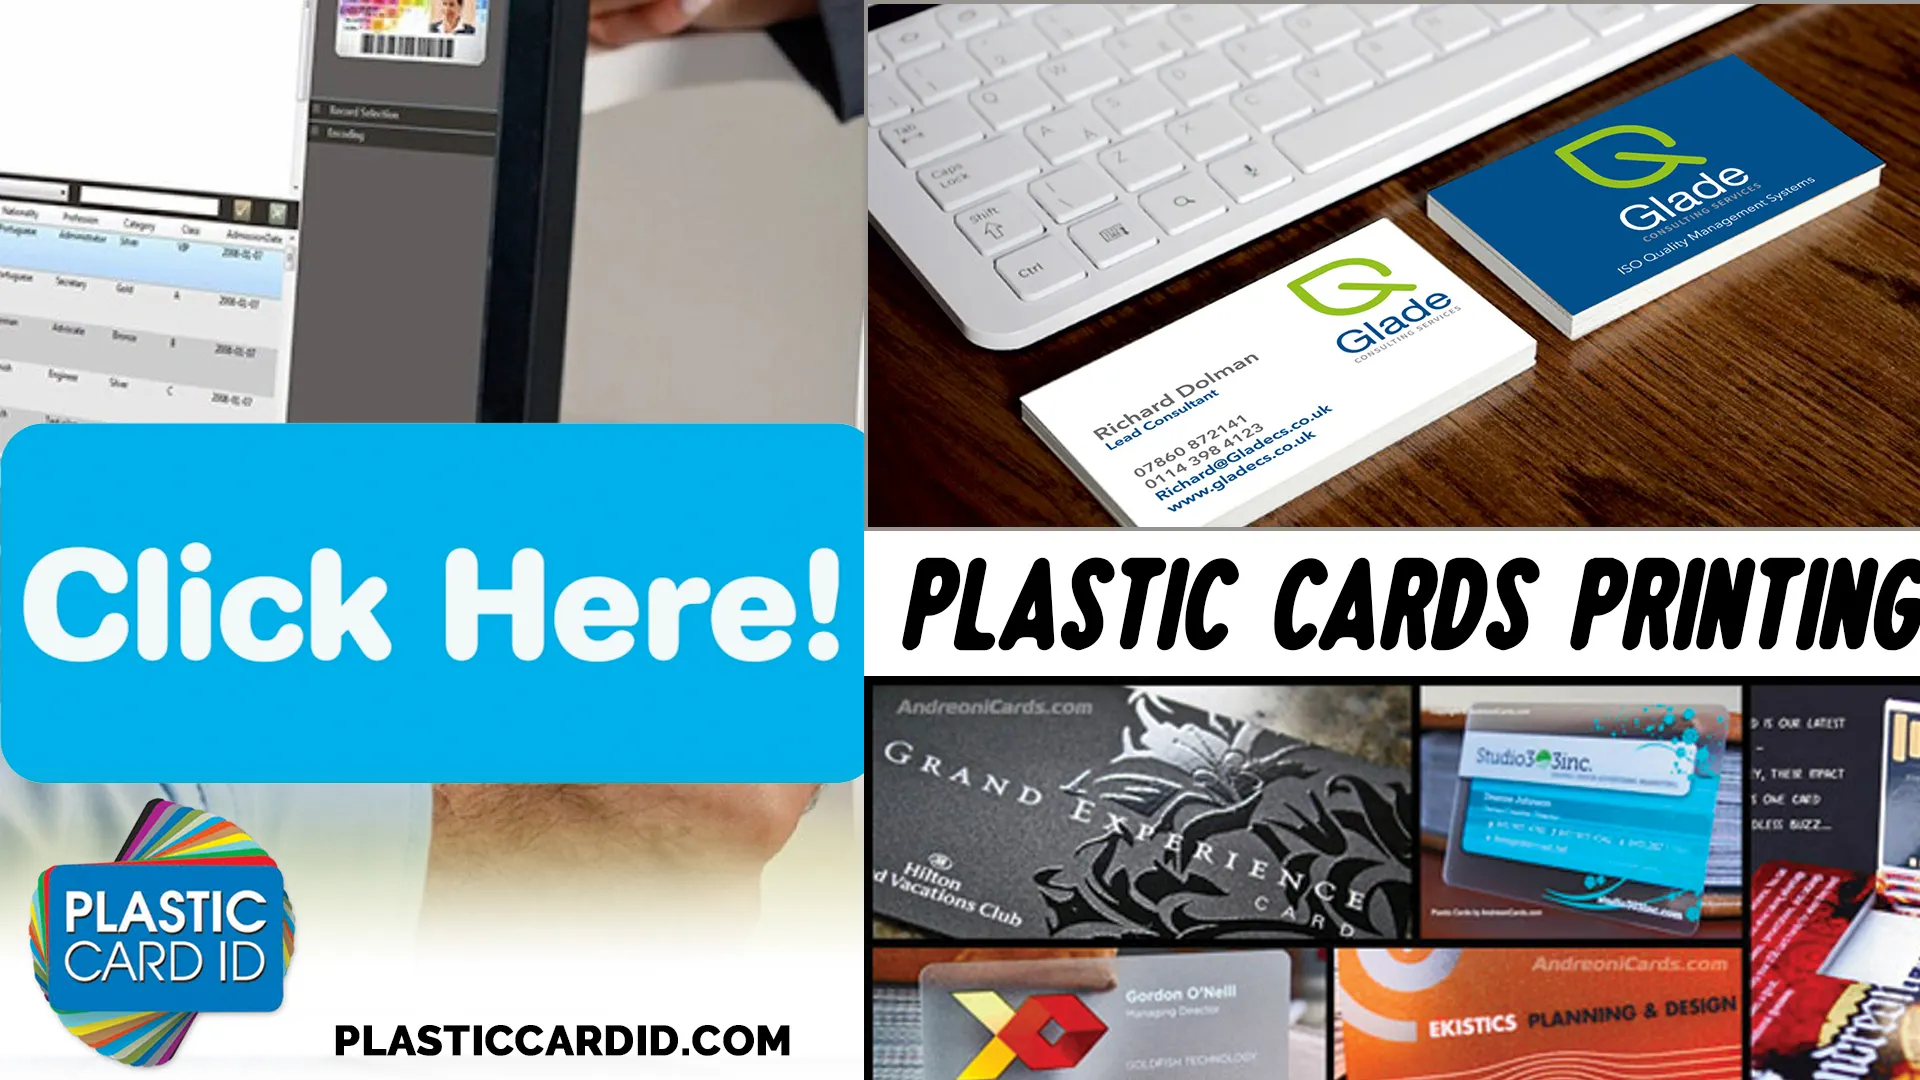 Plastic Card ID
's Commitment to Quality